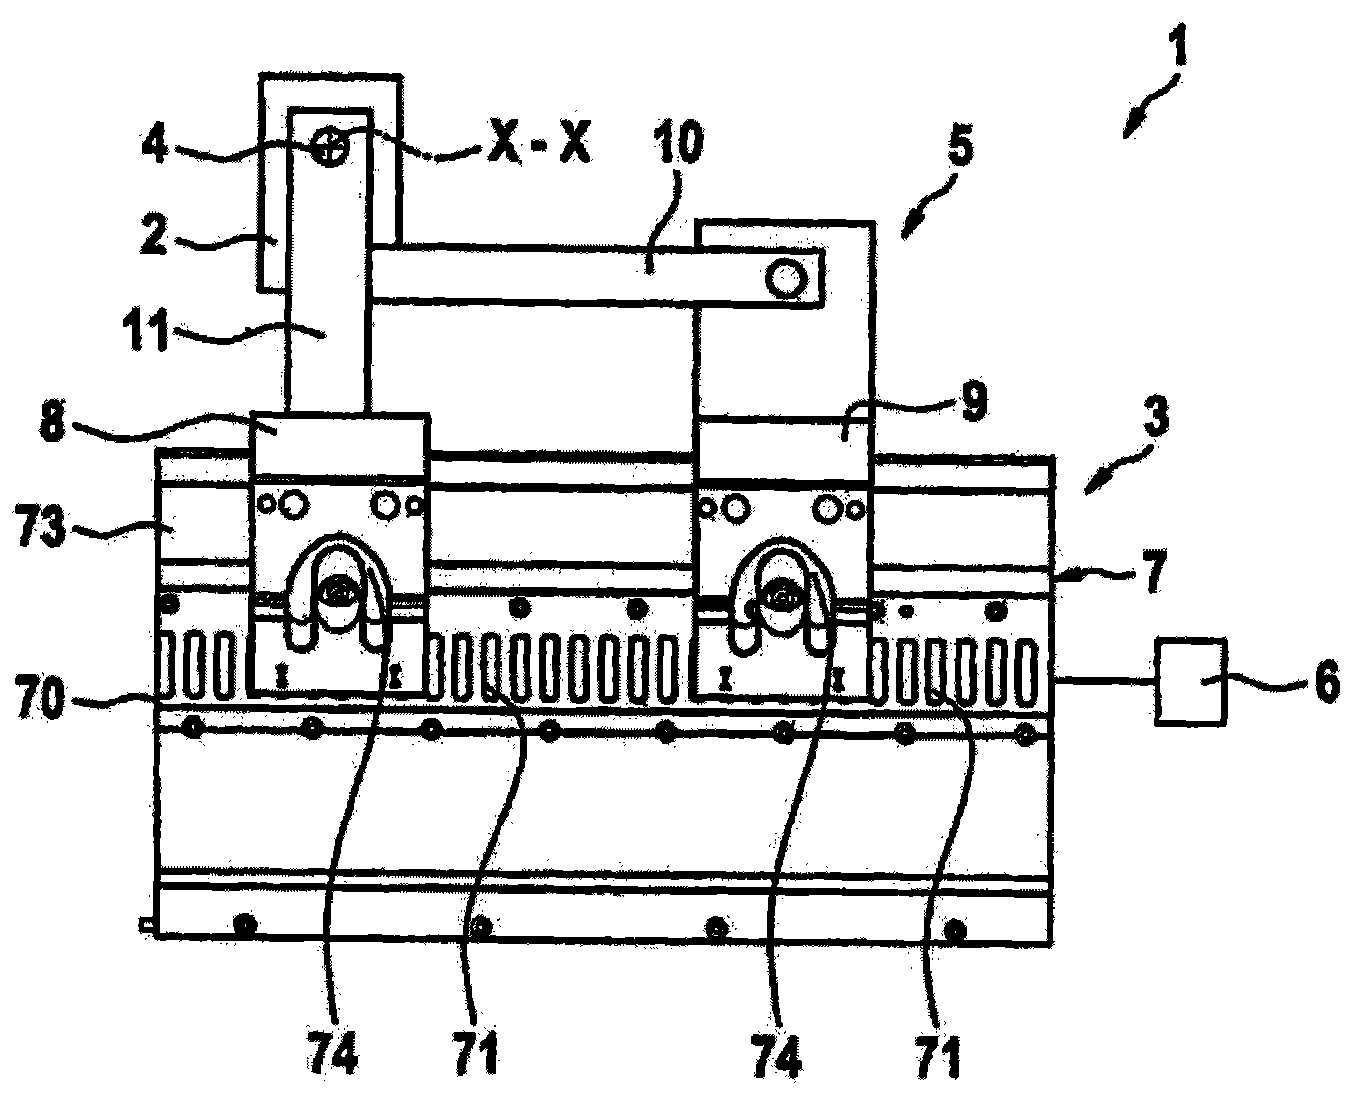 Device used for conveying liquid in container